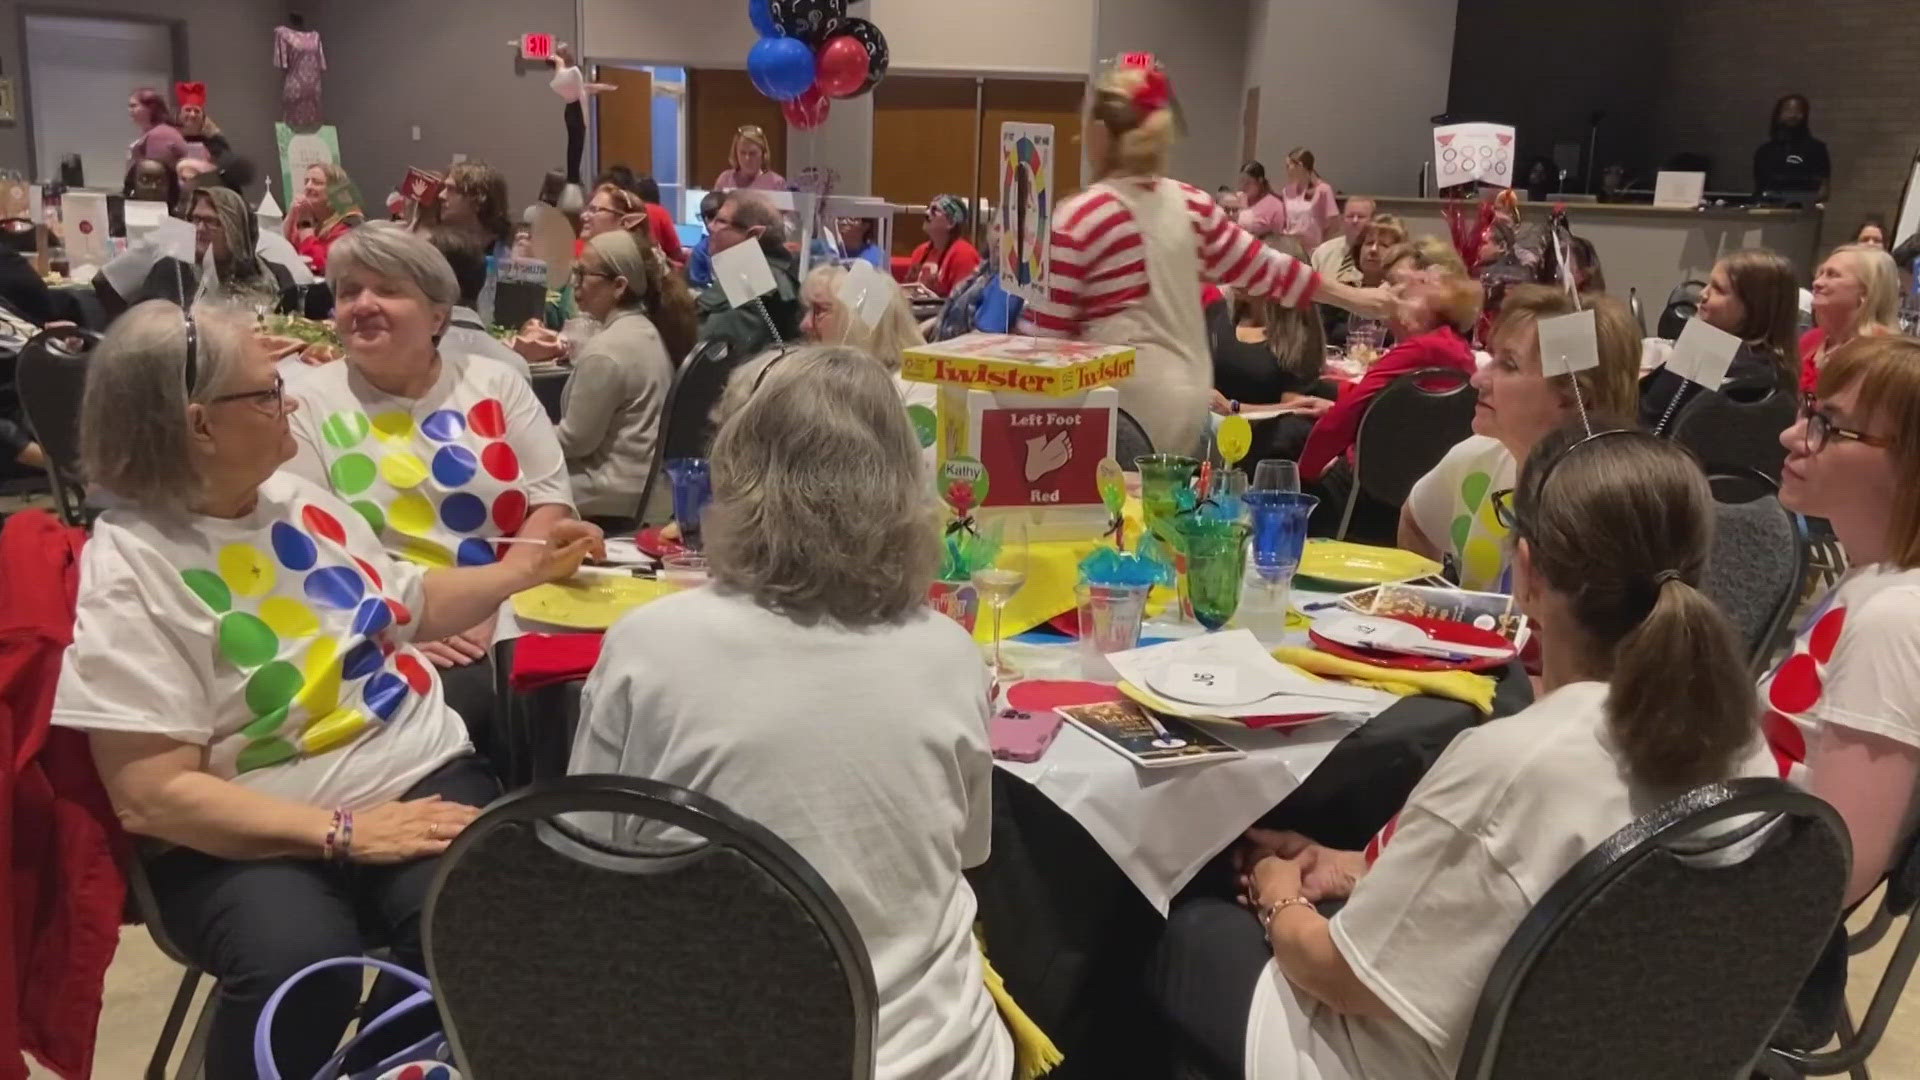 The event raises money for the children's museum in downtown Temple, and this year's theme was childhood board games!